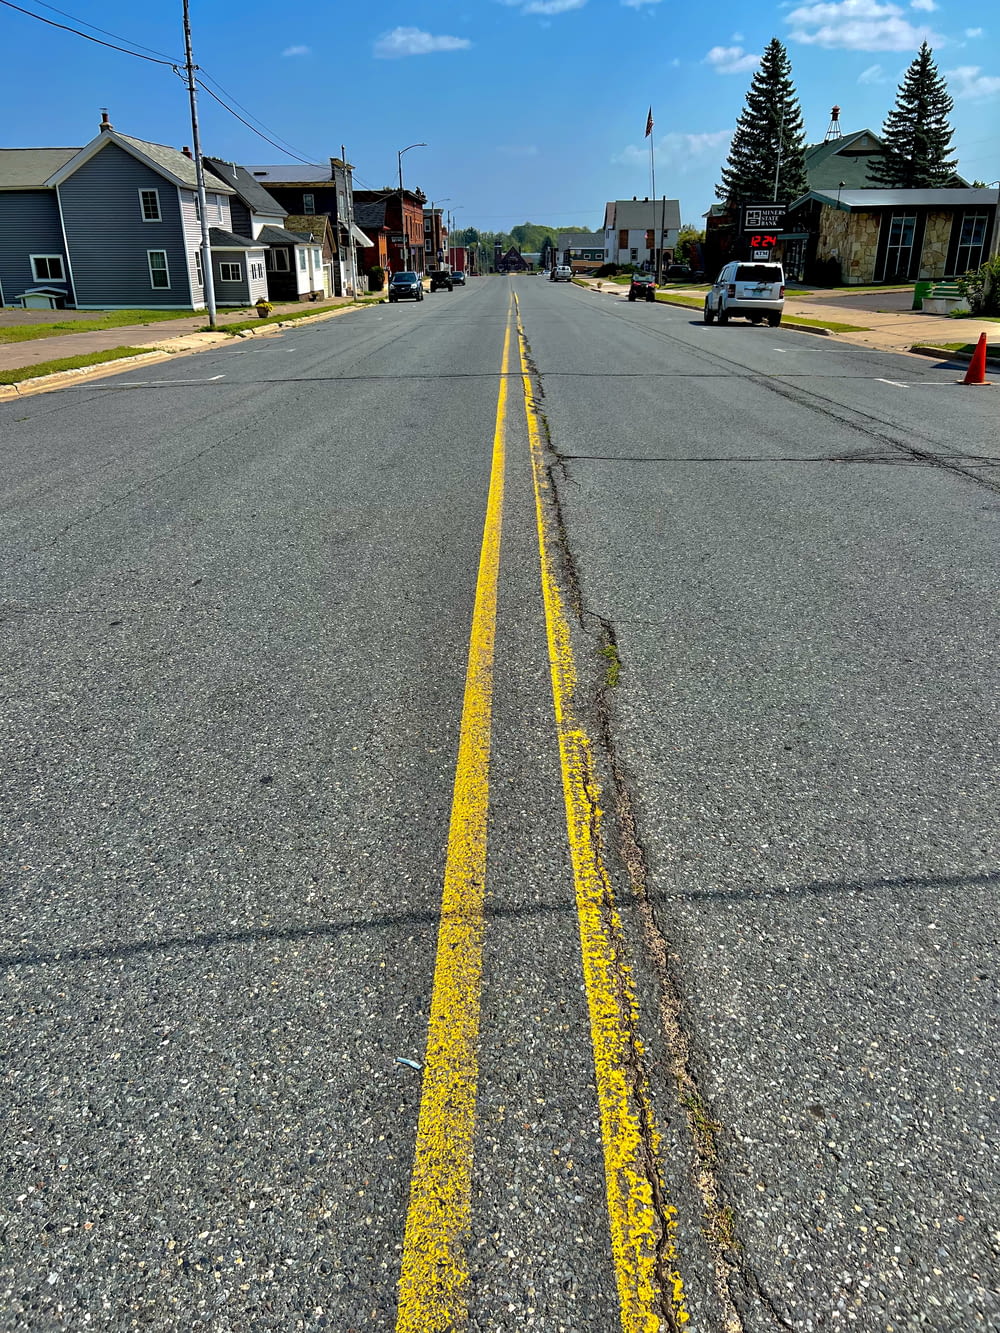 a street with a yellow line painted on it